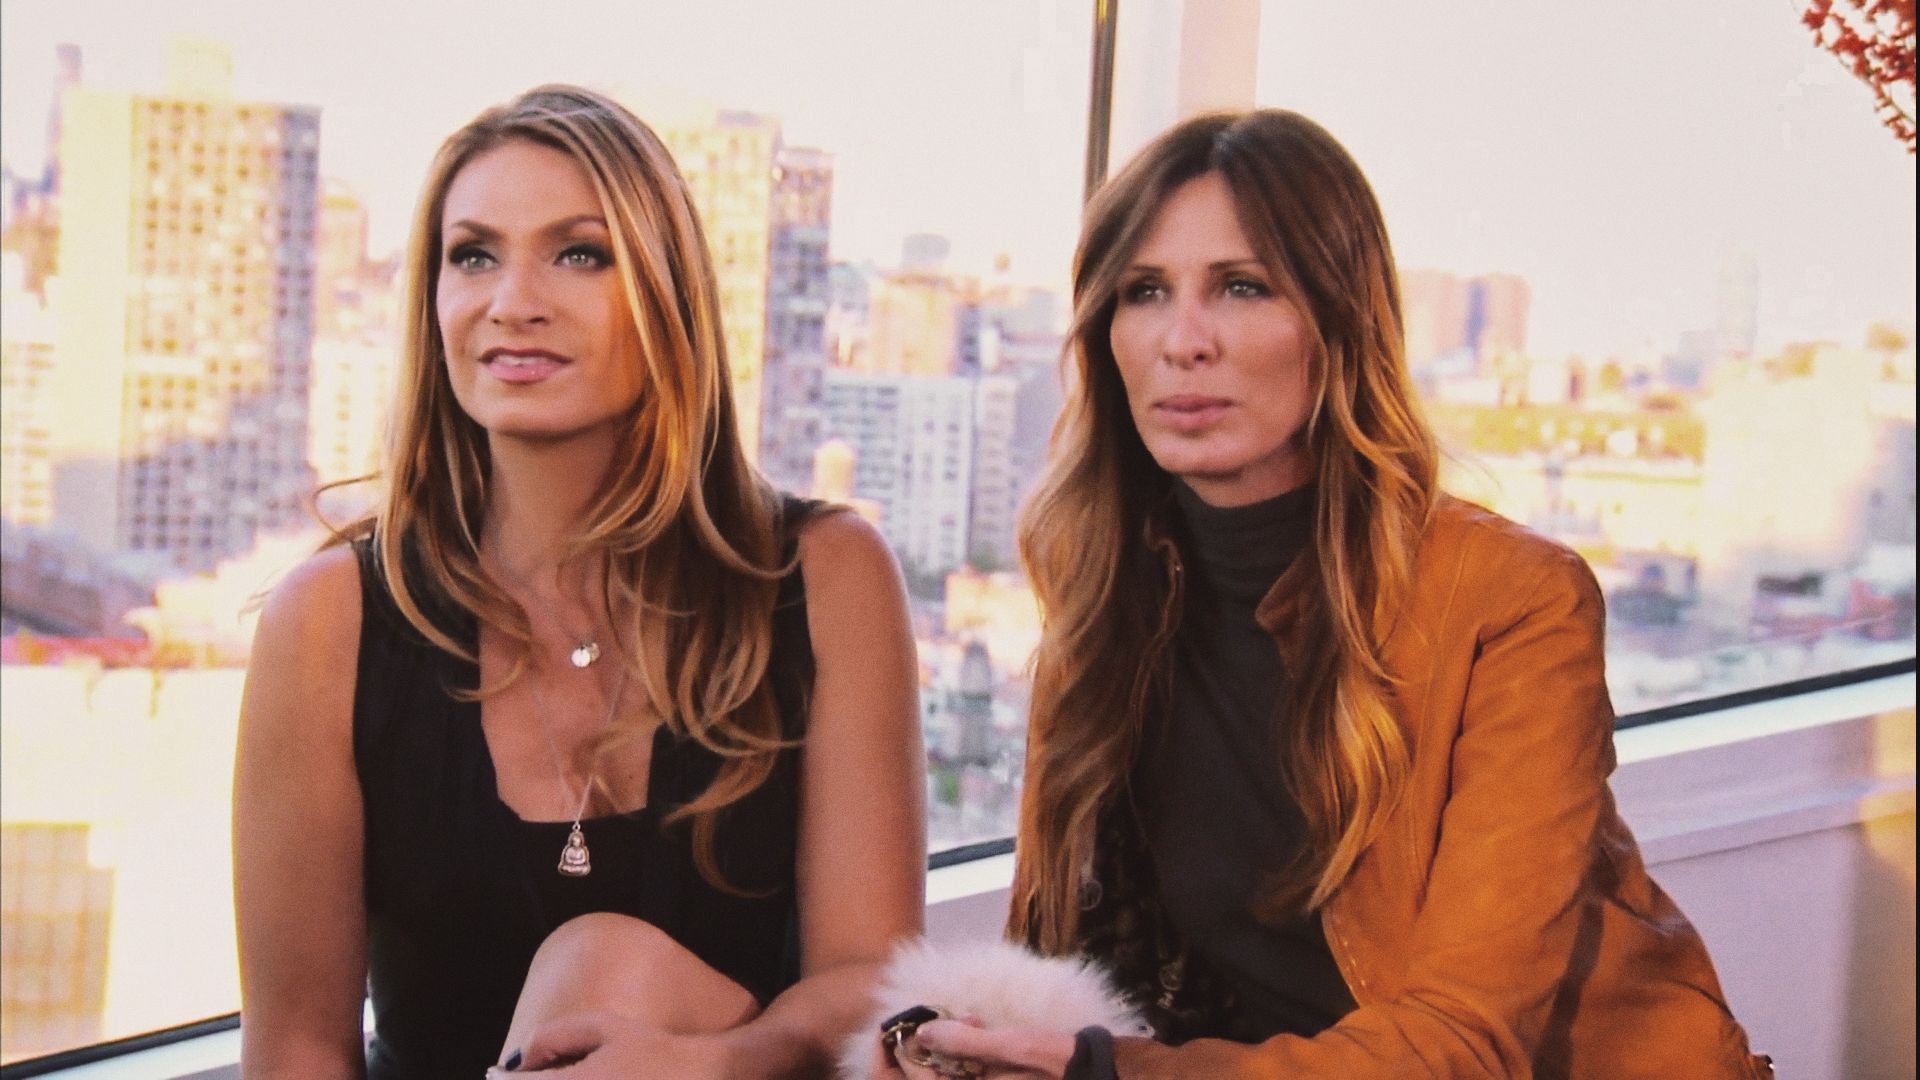 RHONY The Real Housewives of New York City S05E03 saison 5 épisode 3 Boozy Brunch